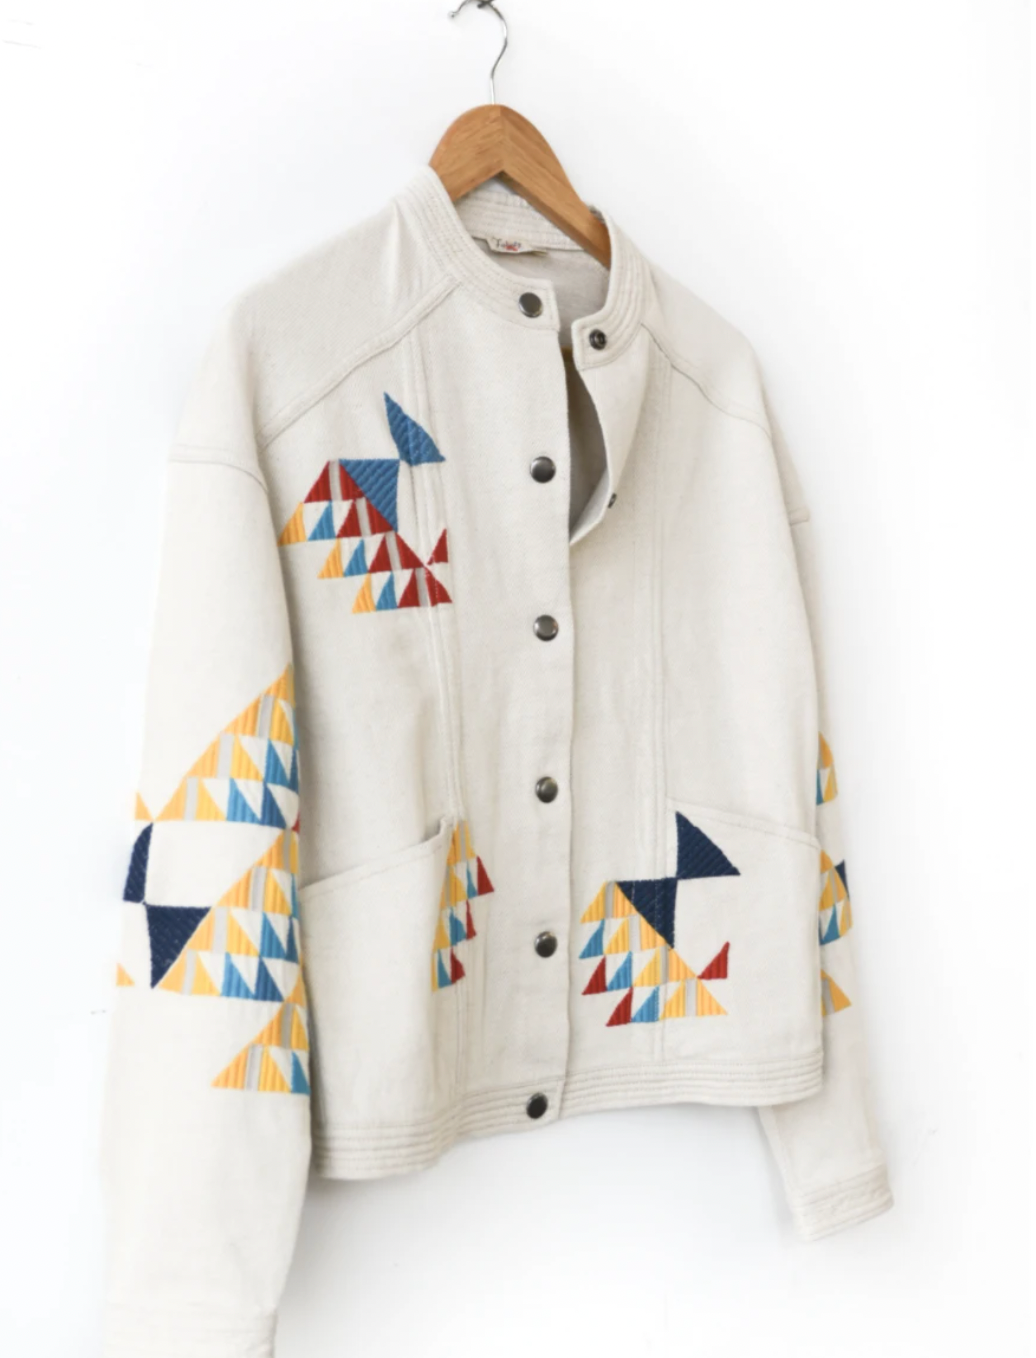 B. Yellowtail star quilt embroidered jacket